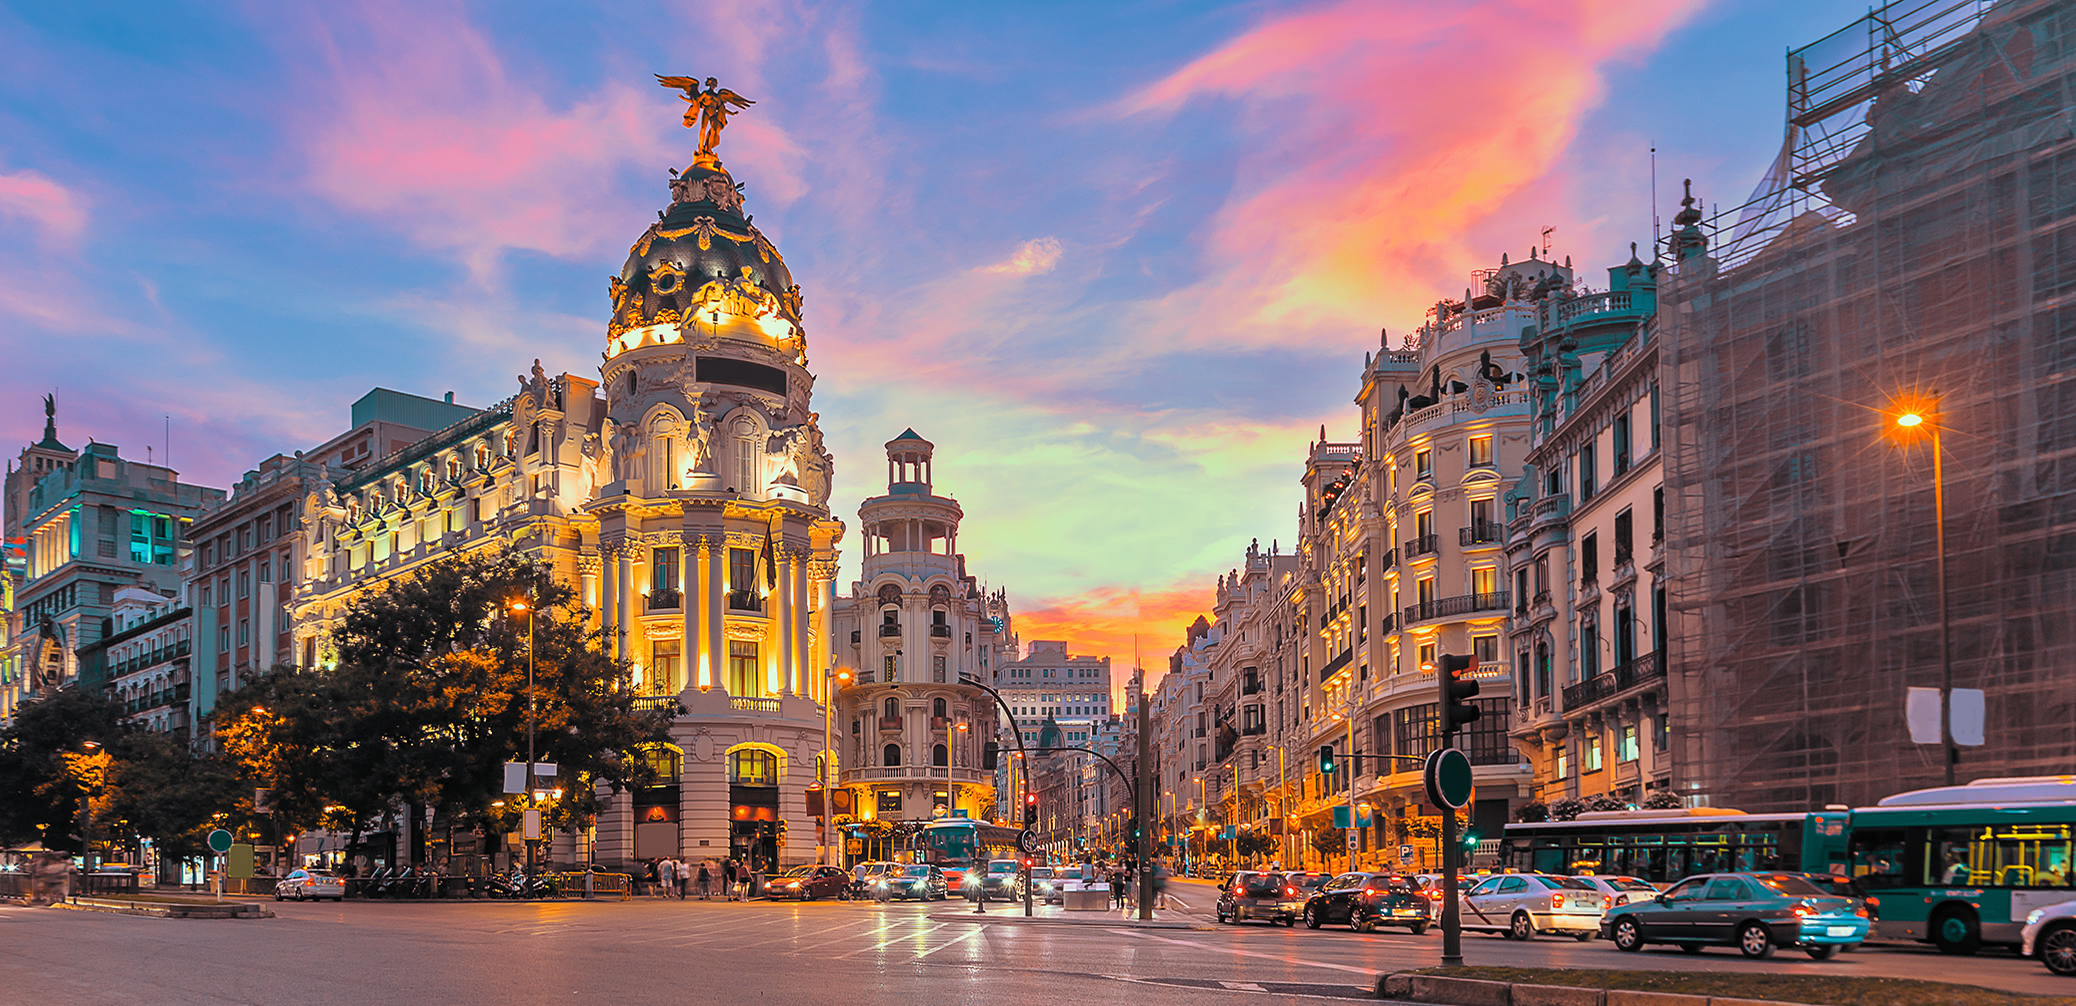 Bid On 2 Nights With Club Lounge Access In A 5-Star Hotel In Madrid